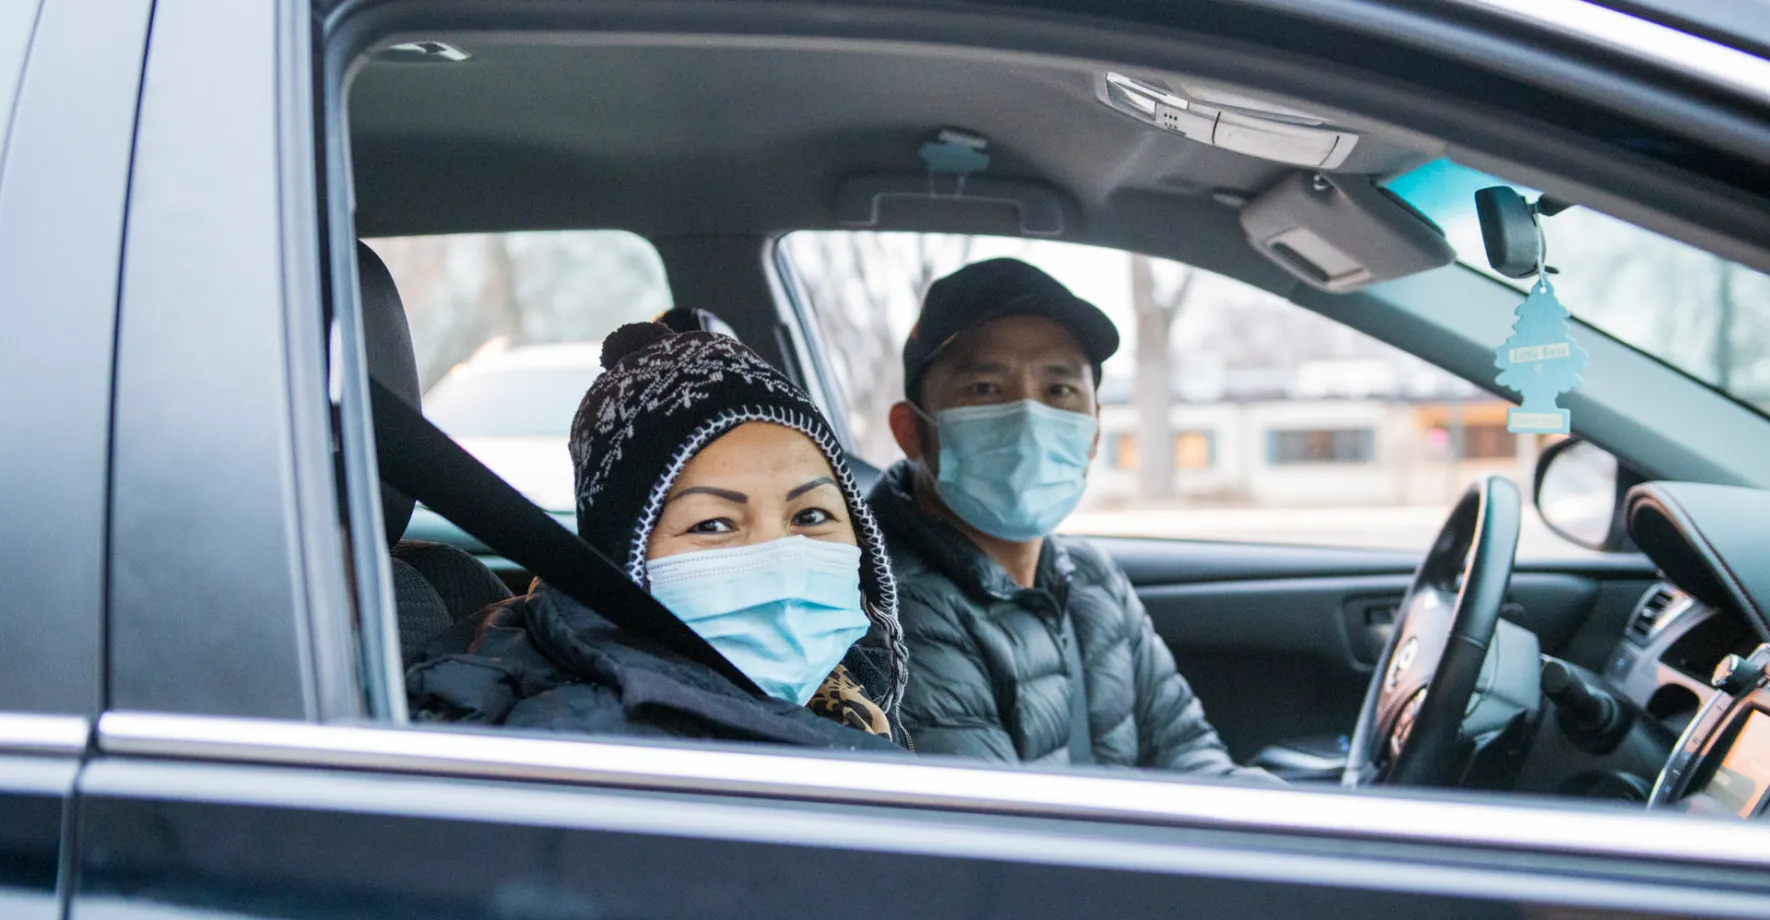 Two people in car wearing masks